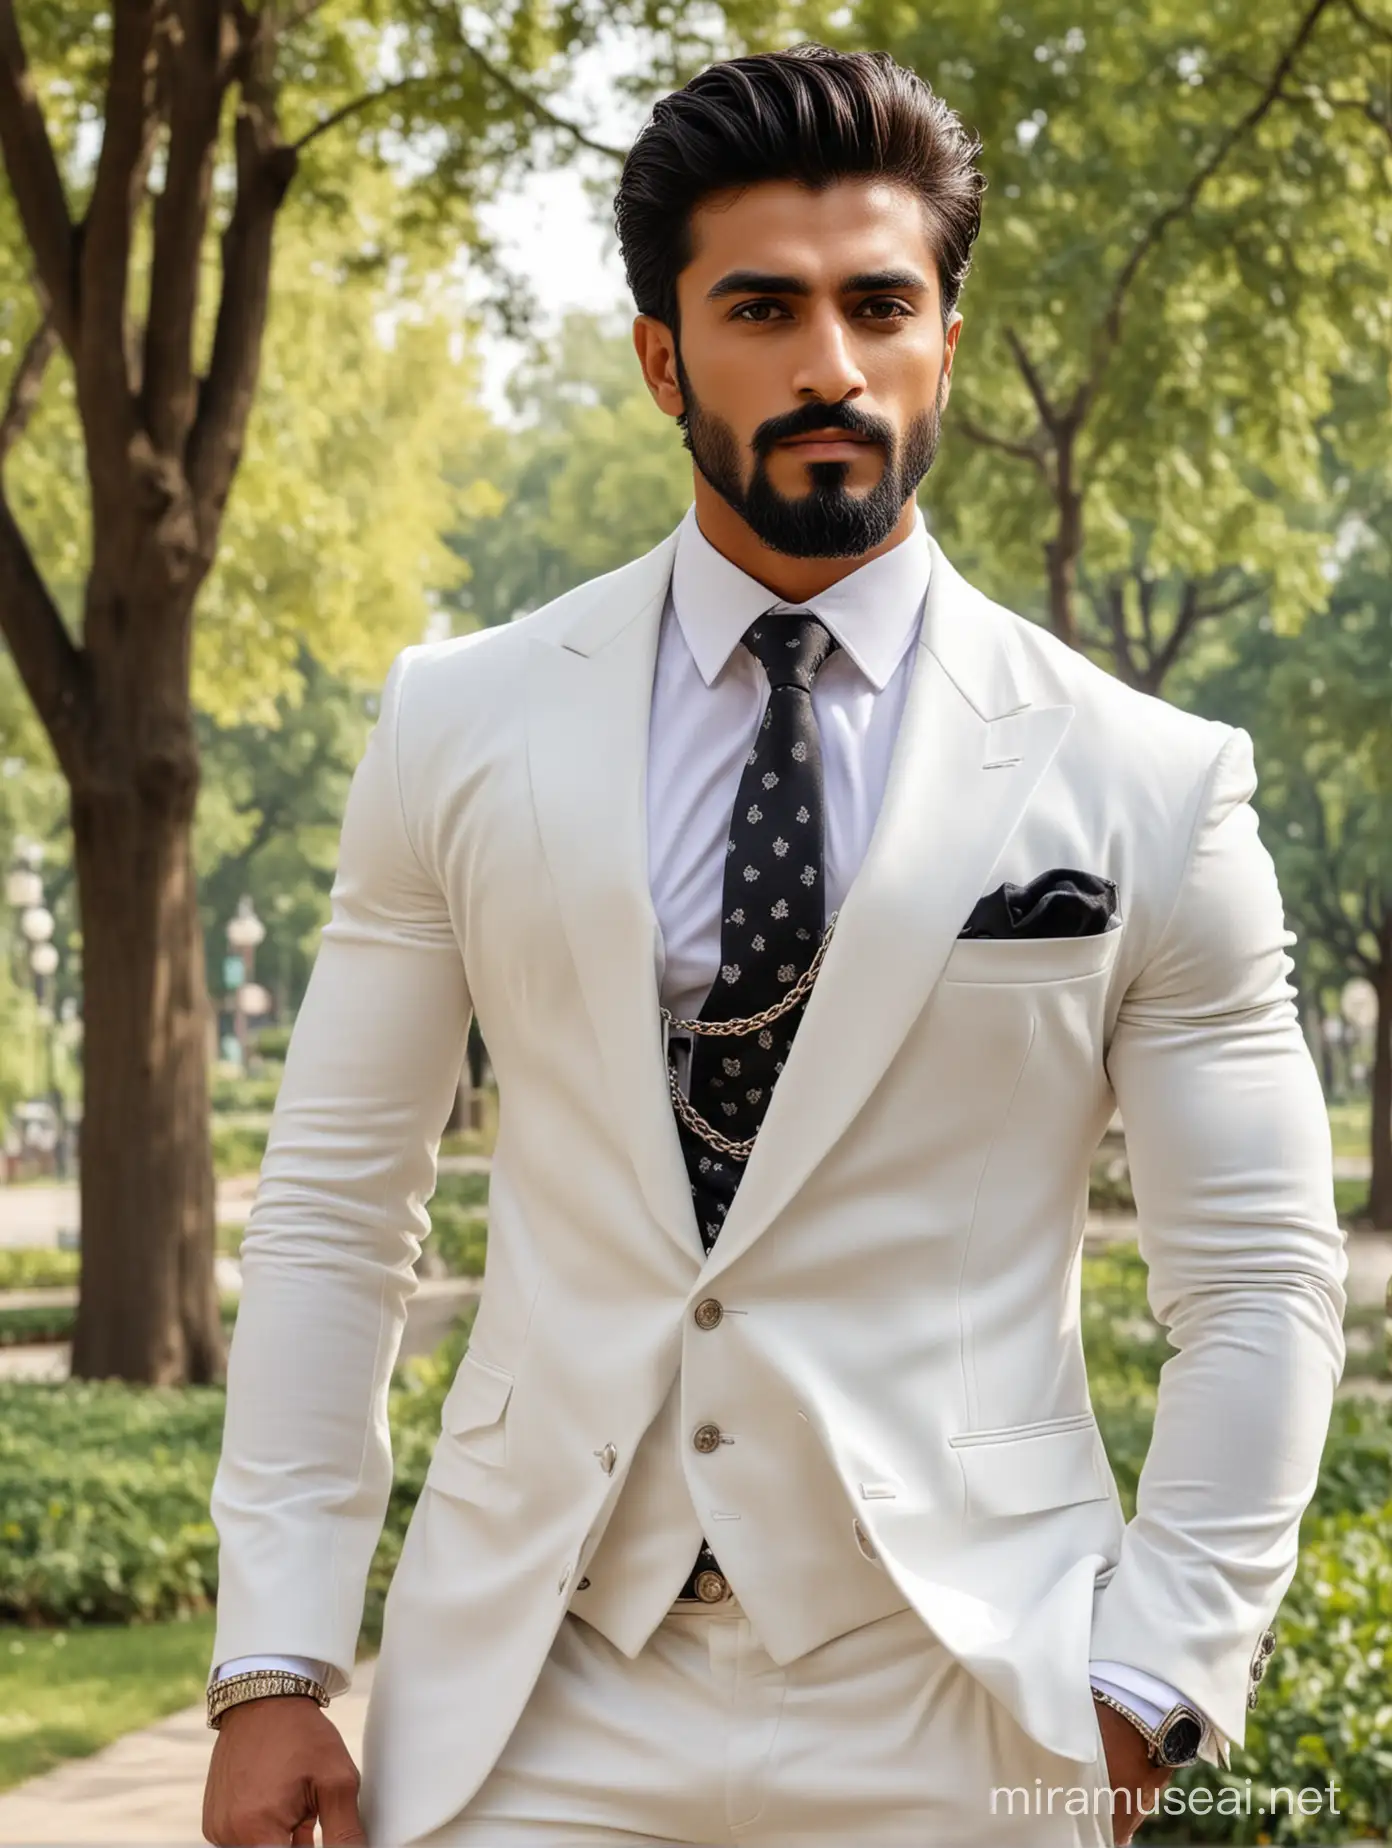 Handsome Pakistani Bodybuilder in Stylish White Suit at Park